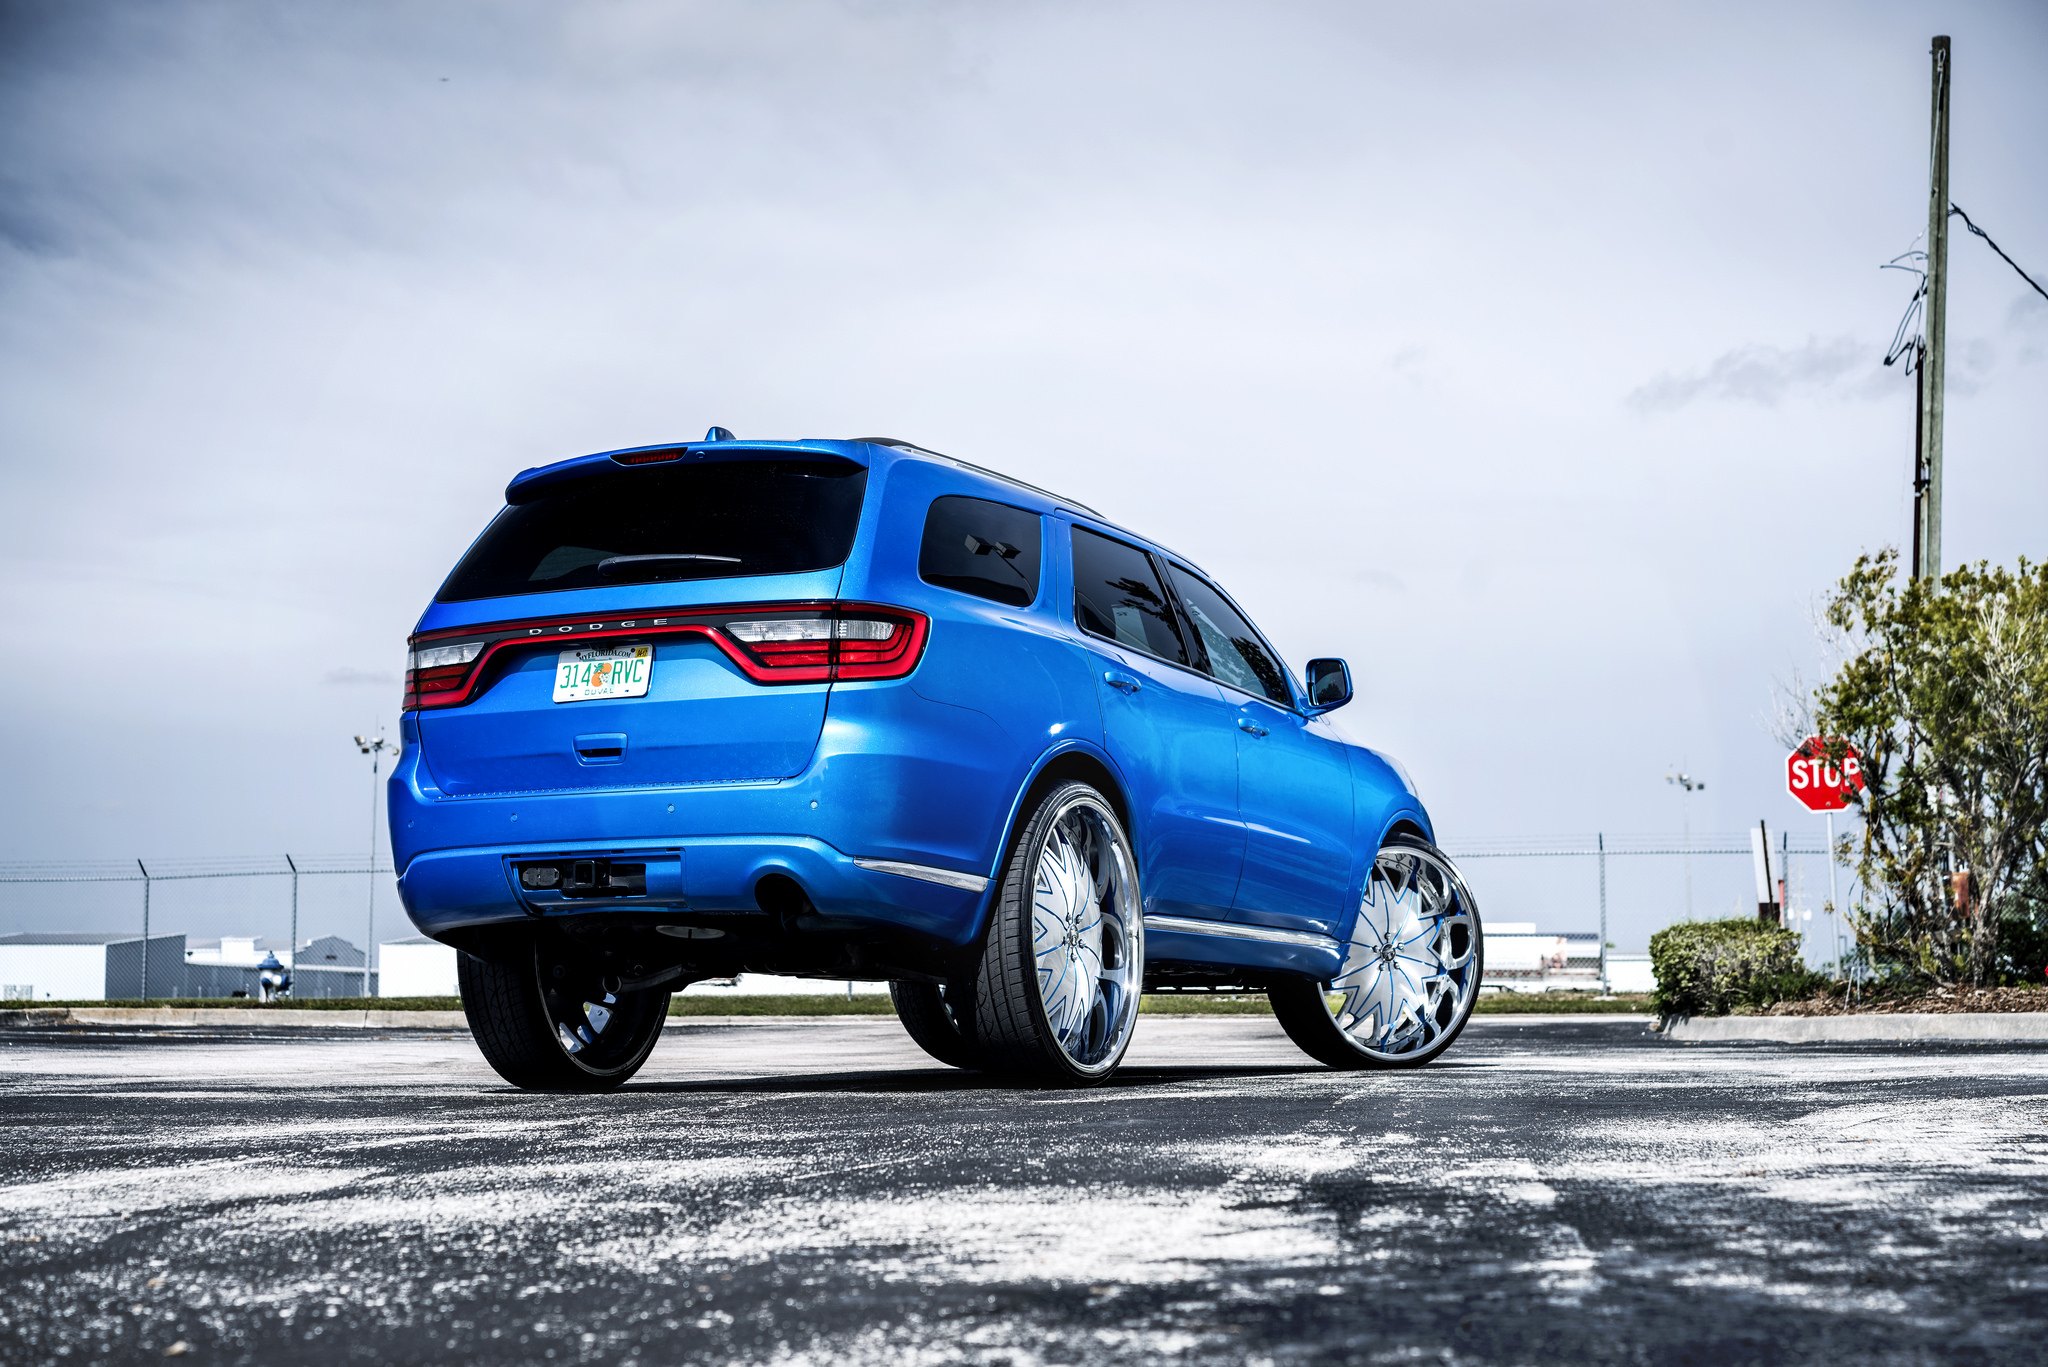 Aftermarket LED Taillights on Blue Dodge Durango - Photo by DUB